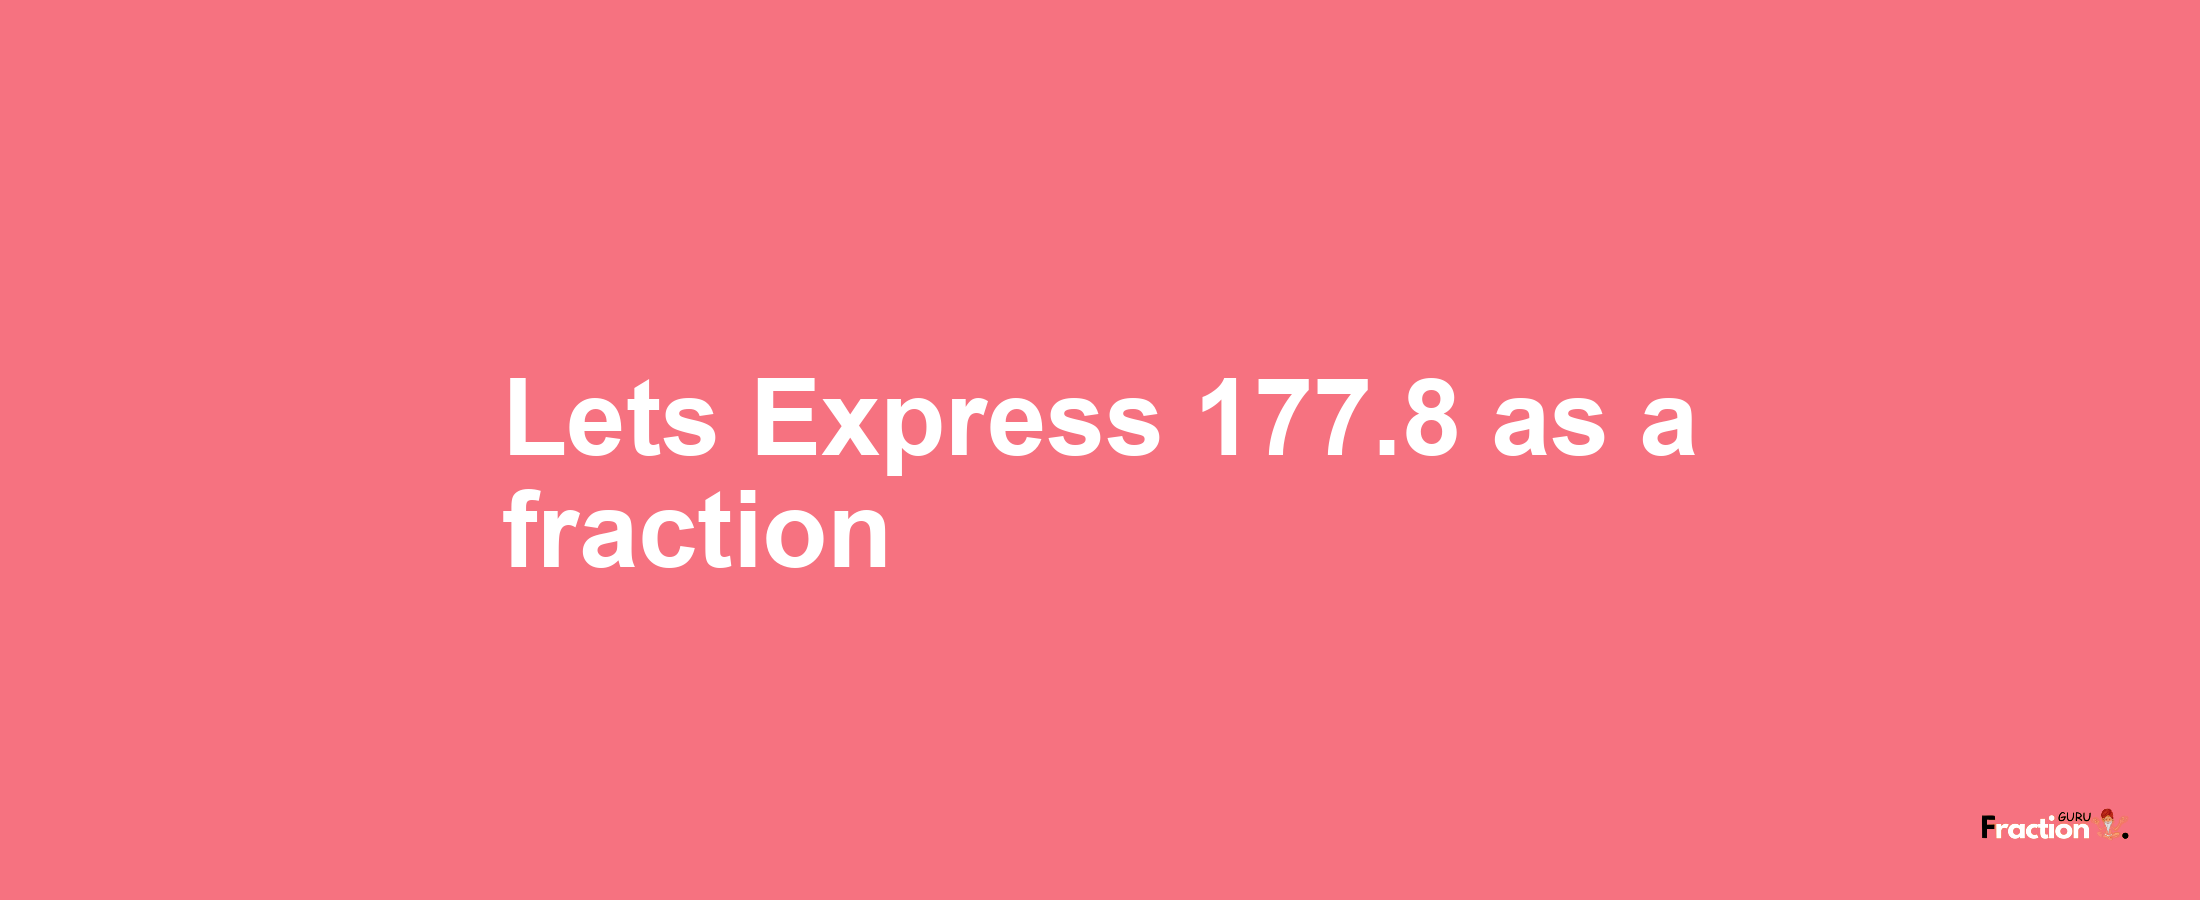 Lets Express 177.8 as afraction